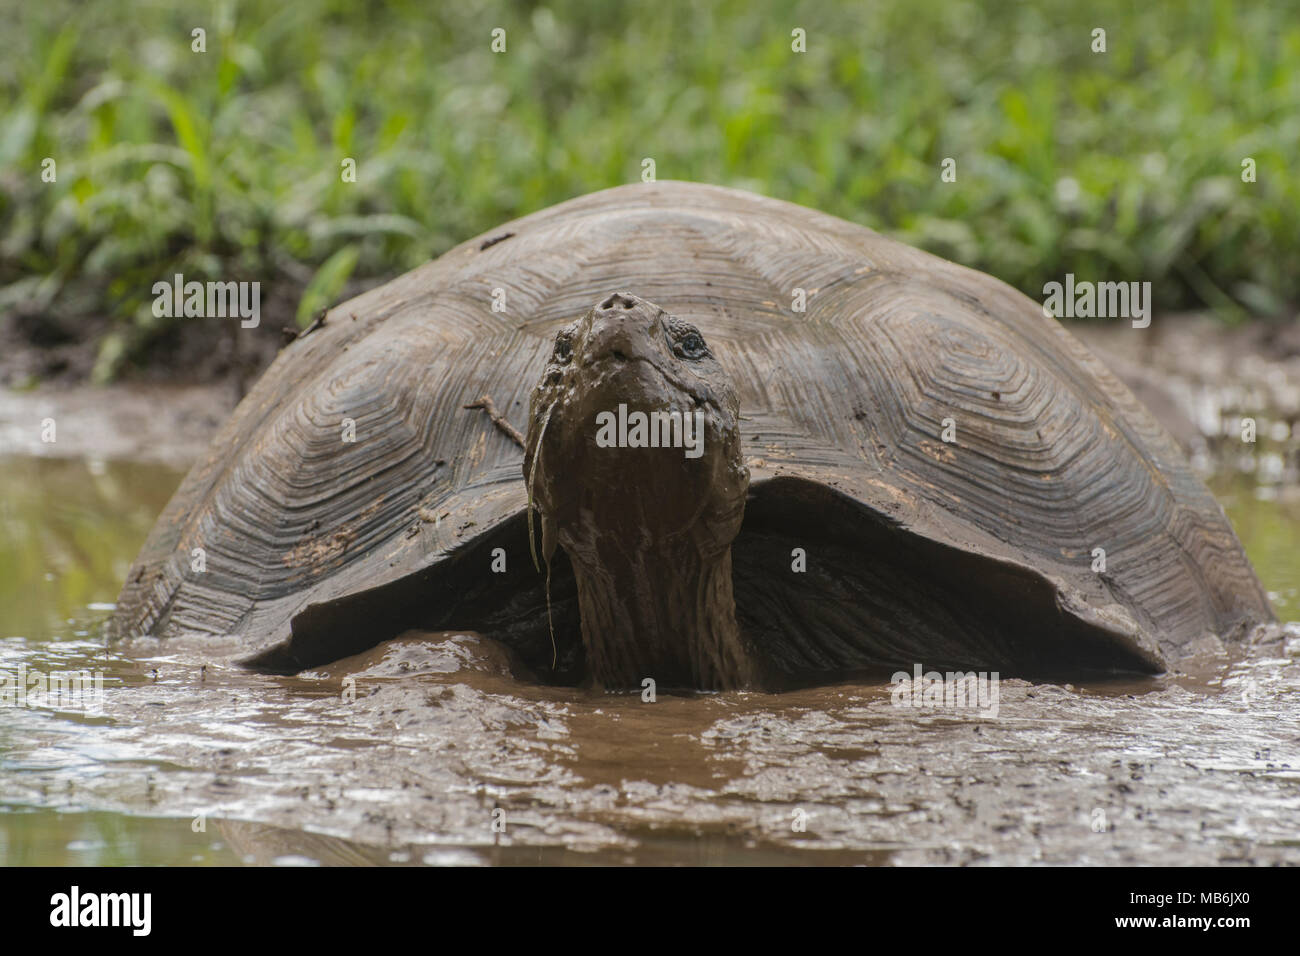 A galapagos giant tortoise (Chelonoidis nigra) taking a mud bath in order to escape the heat. These are only found on the Galapagos islands. Stock Photo